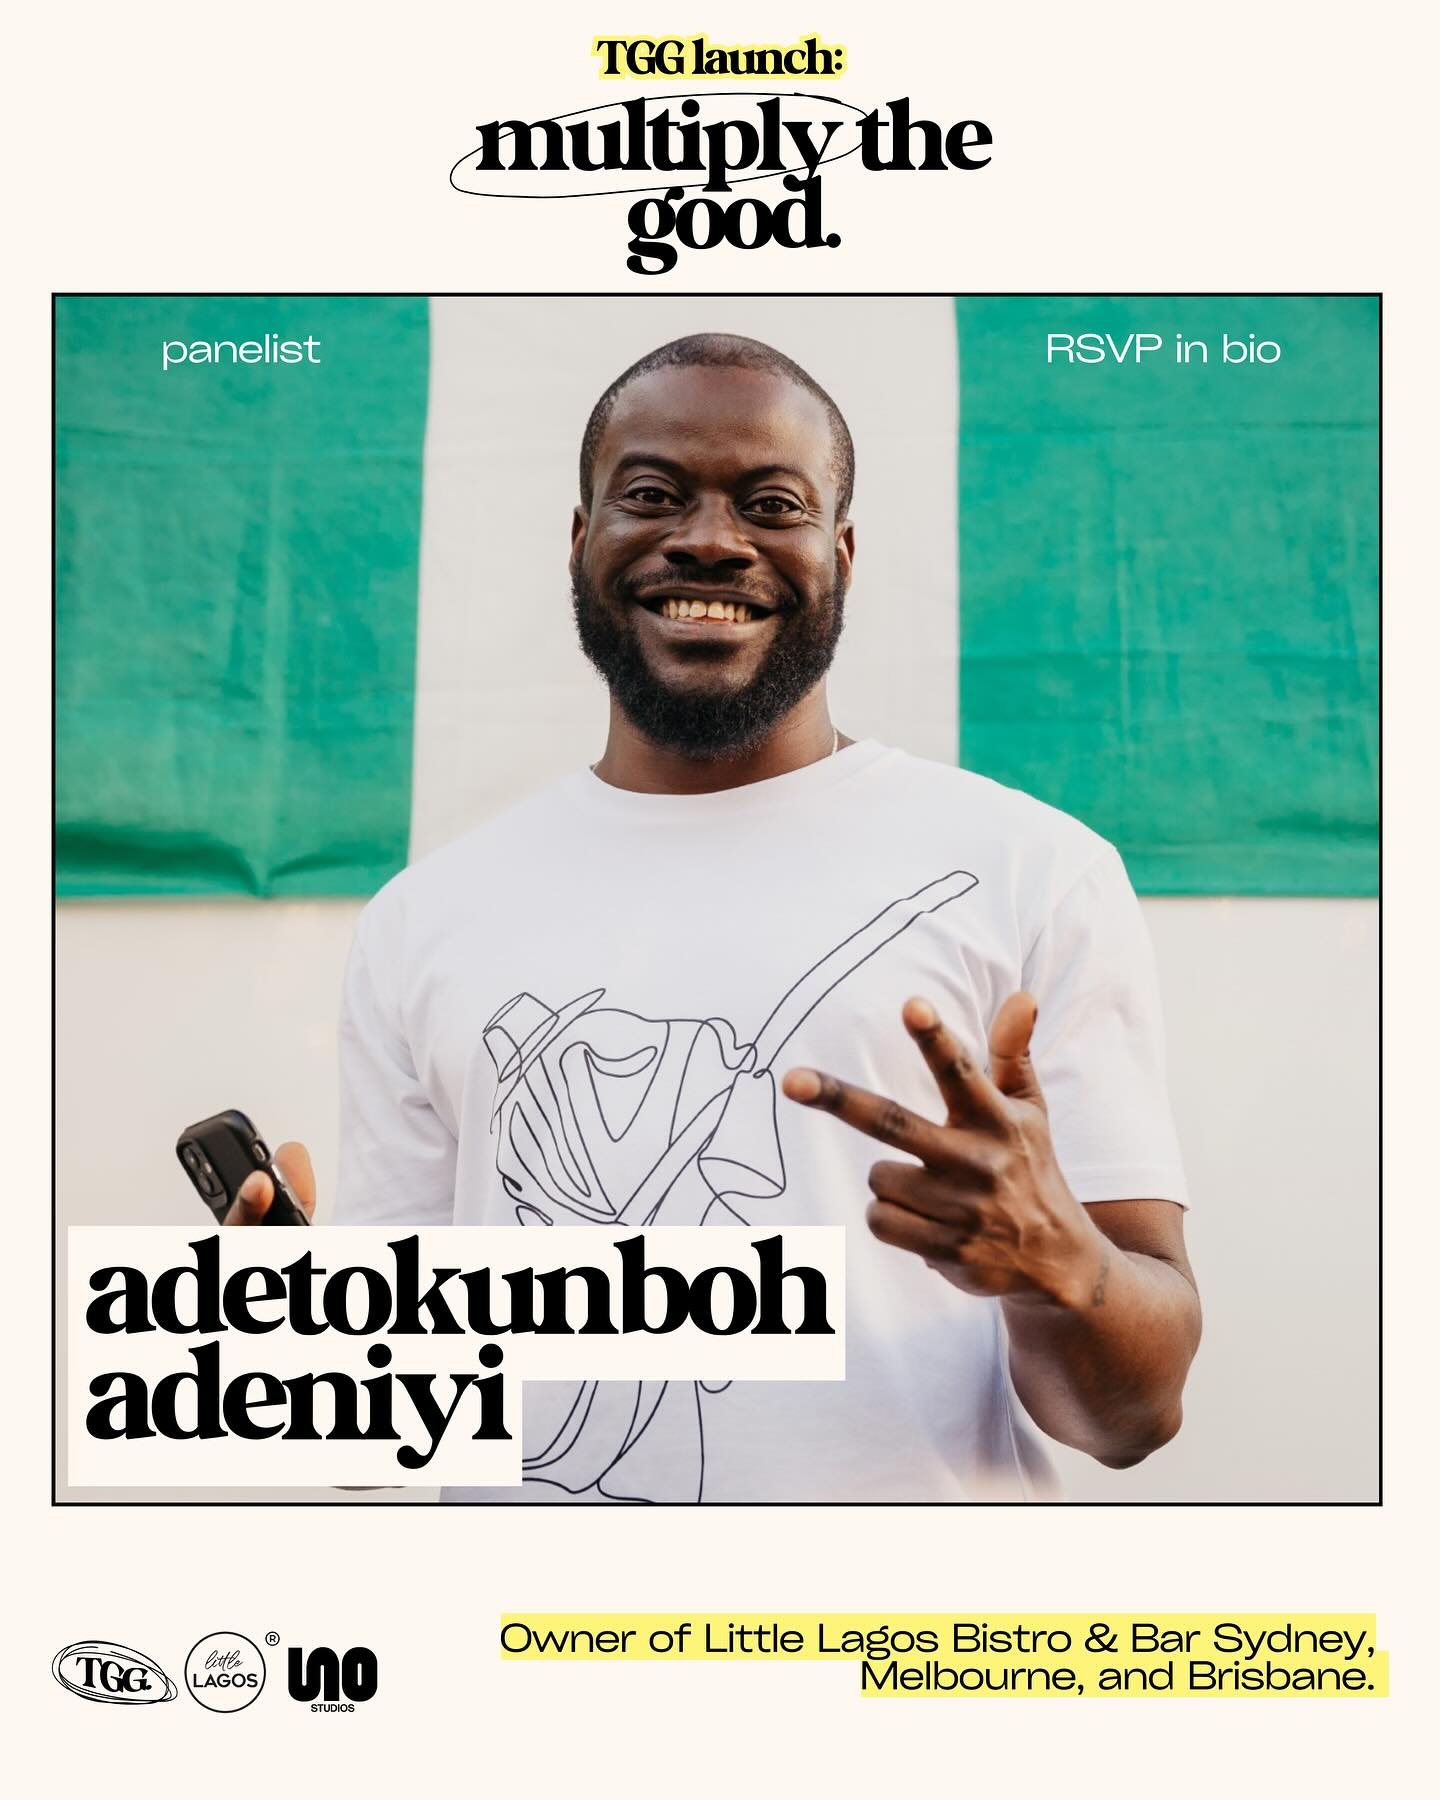 website? launched. now, we&rsquo;re on!!! get ready to meet your panelists for our multiply the good launch event🚀

first off, meet Adetokunboh Adeniyi, owner of Australia&rsquo;s very own Little Lagos, and proud sponsor of our launch. Ade is truly 